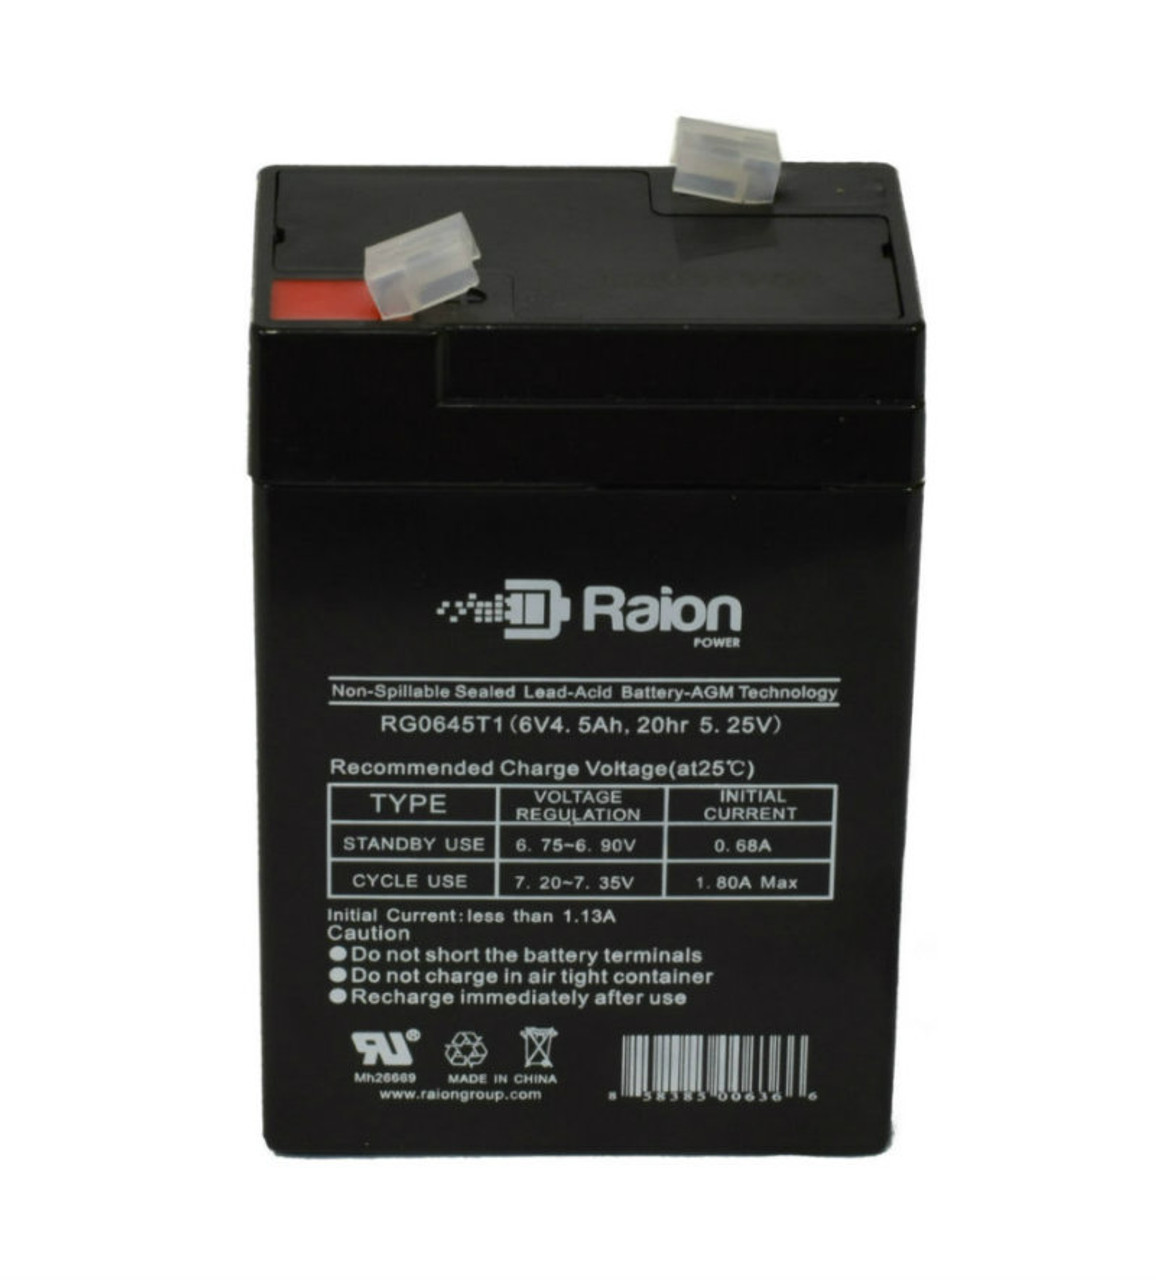 Raion Power RG0645T1 Replacement Battery Cartridge for Emergi-Lite PMP6V5